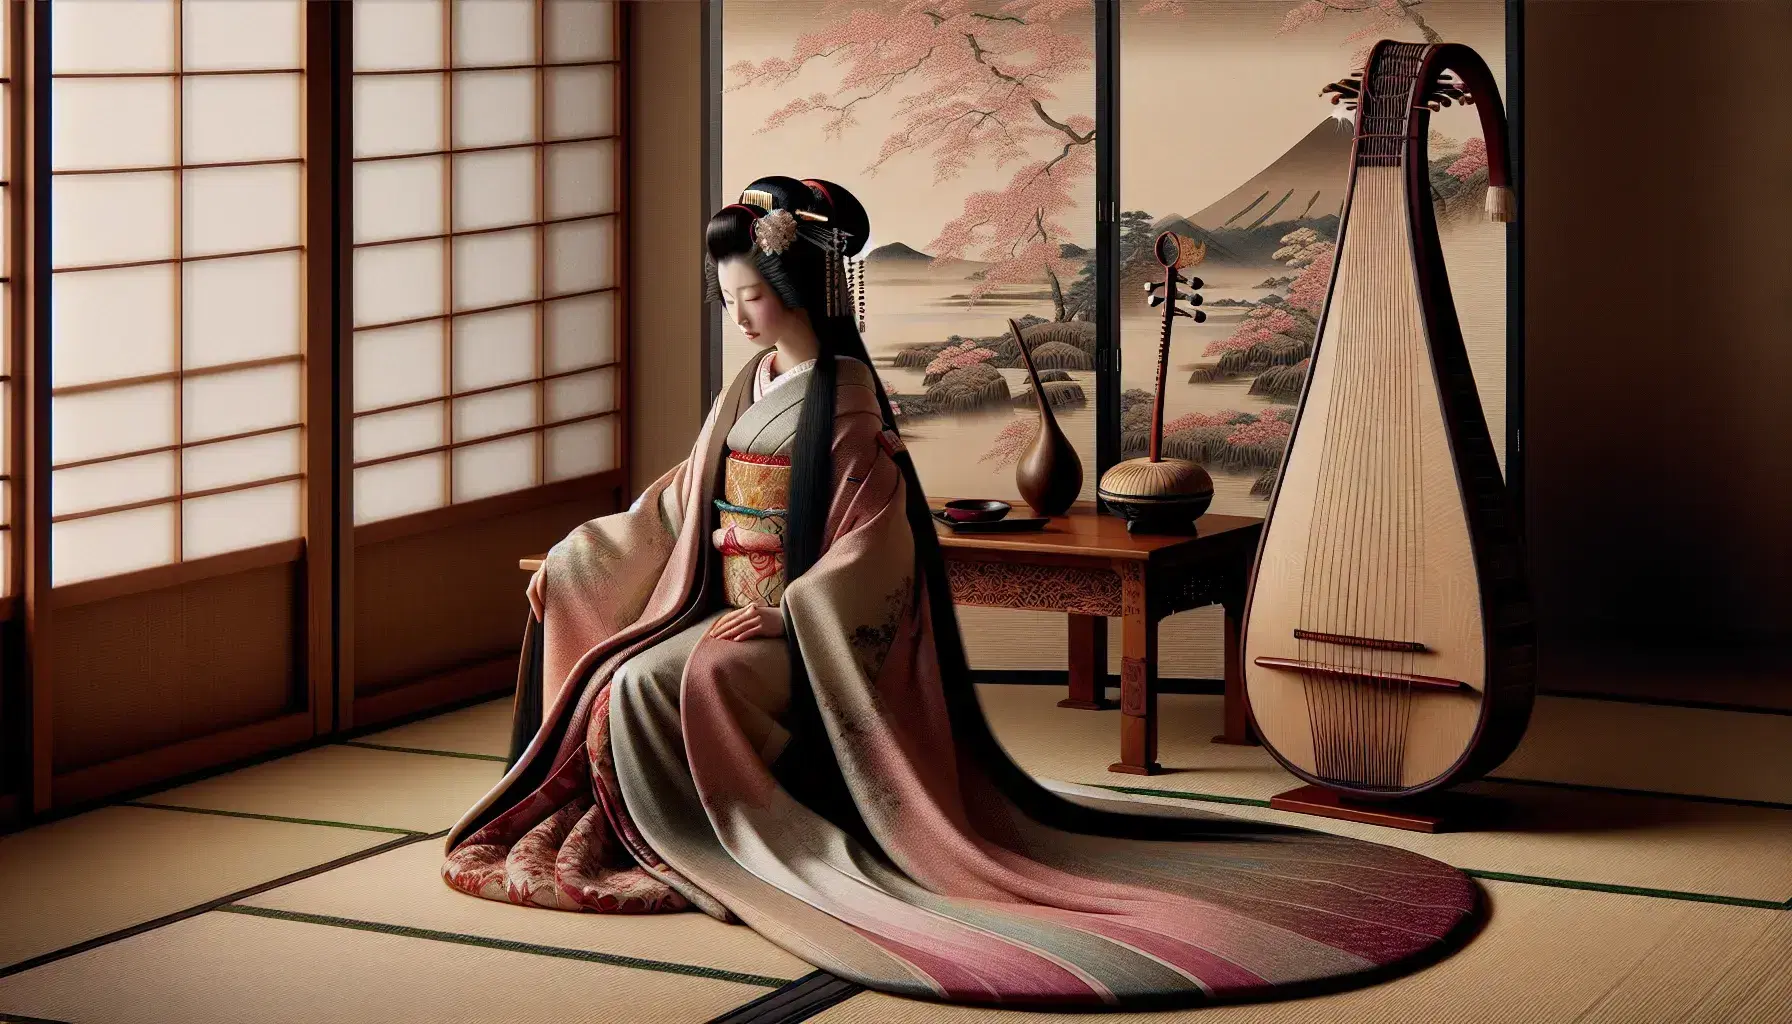 Heian period Japanese noblewoman in a gradient junihitoe kimono sits by a biwa, with a man holding a bamboo flute near a painted screen.